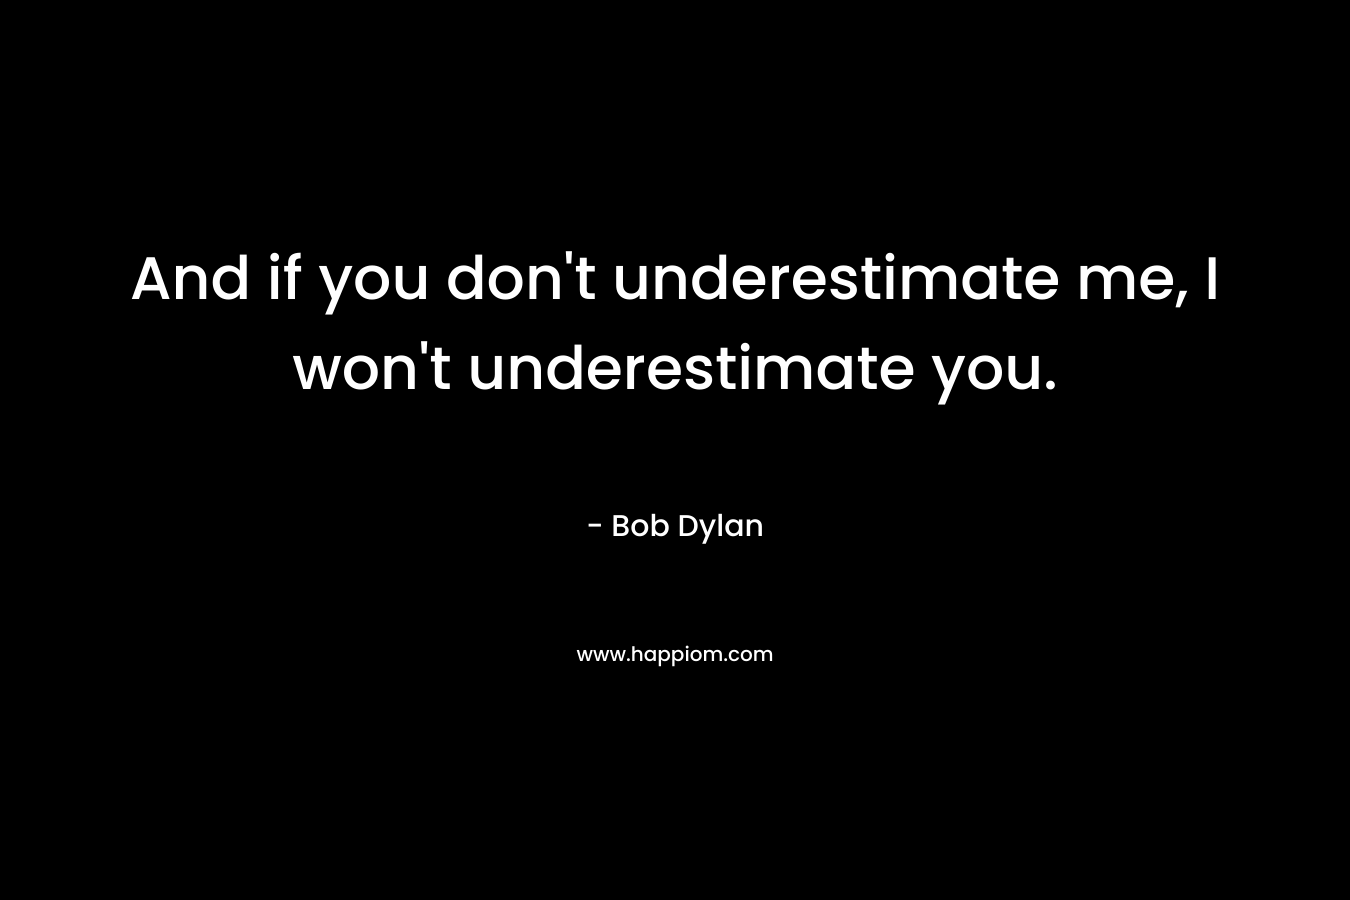 And if you don't underestimate me, I won't underestimate you.